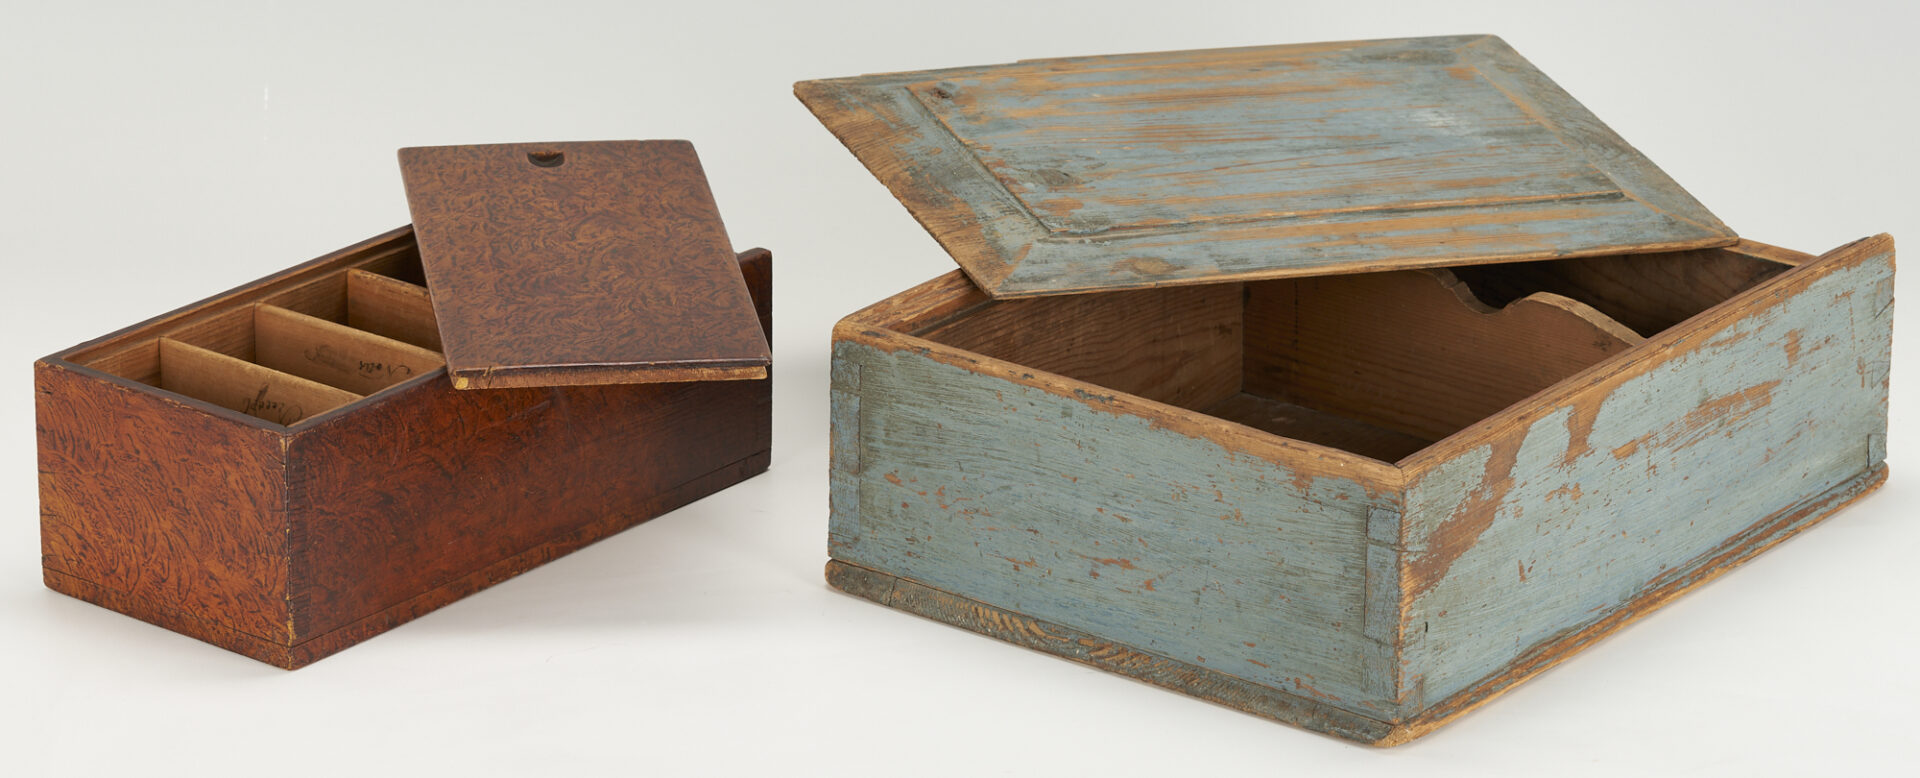 Lot 191: 4 American Folk Art Boxes, incl. Candle & Document Boxes